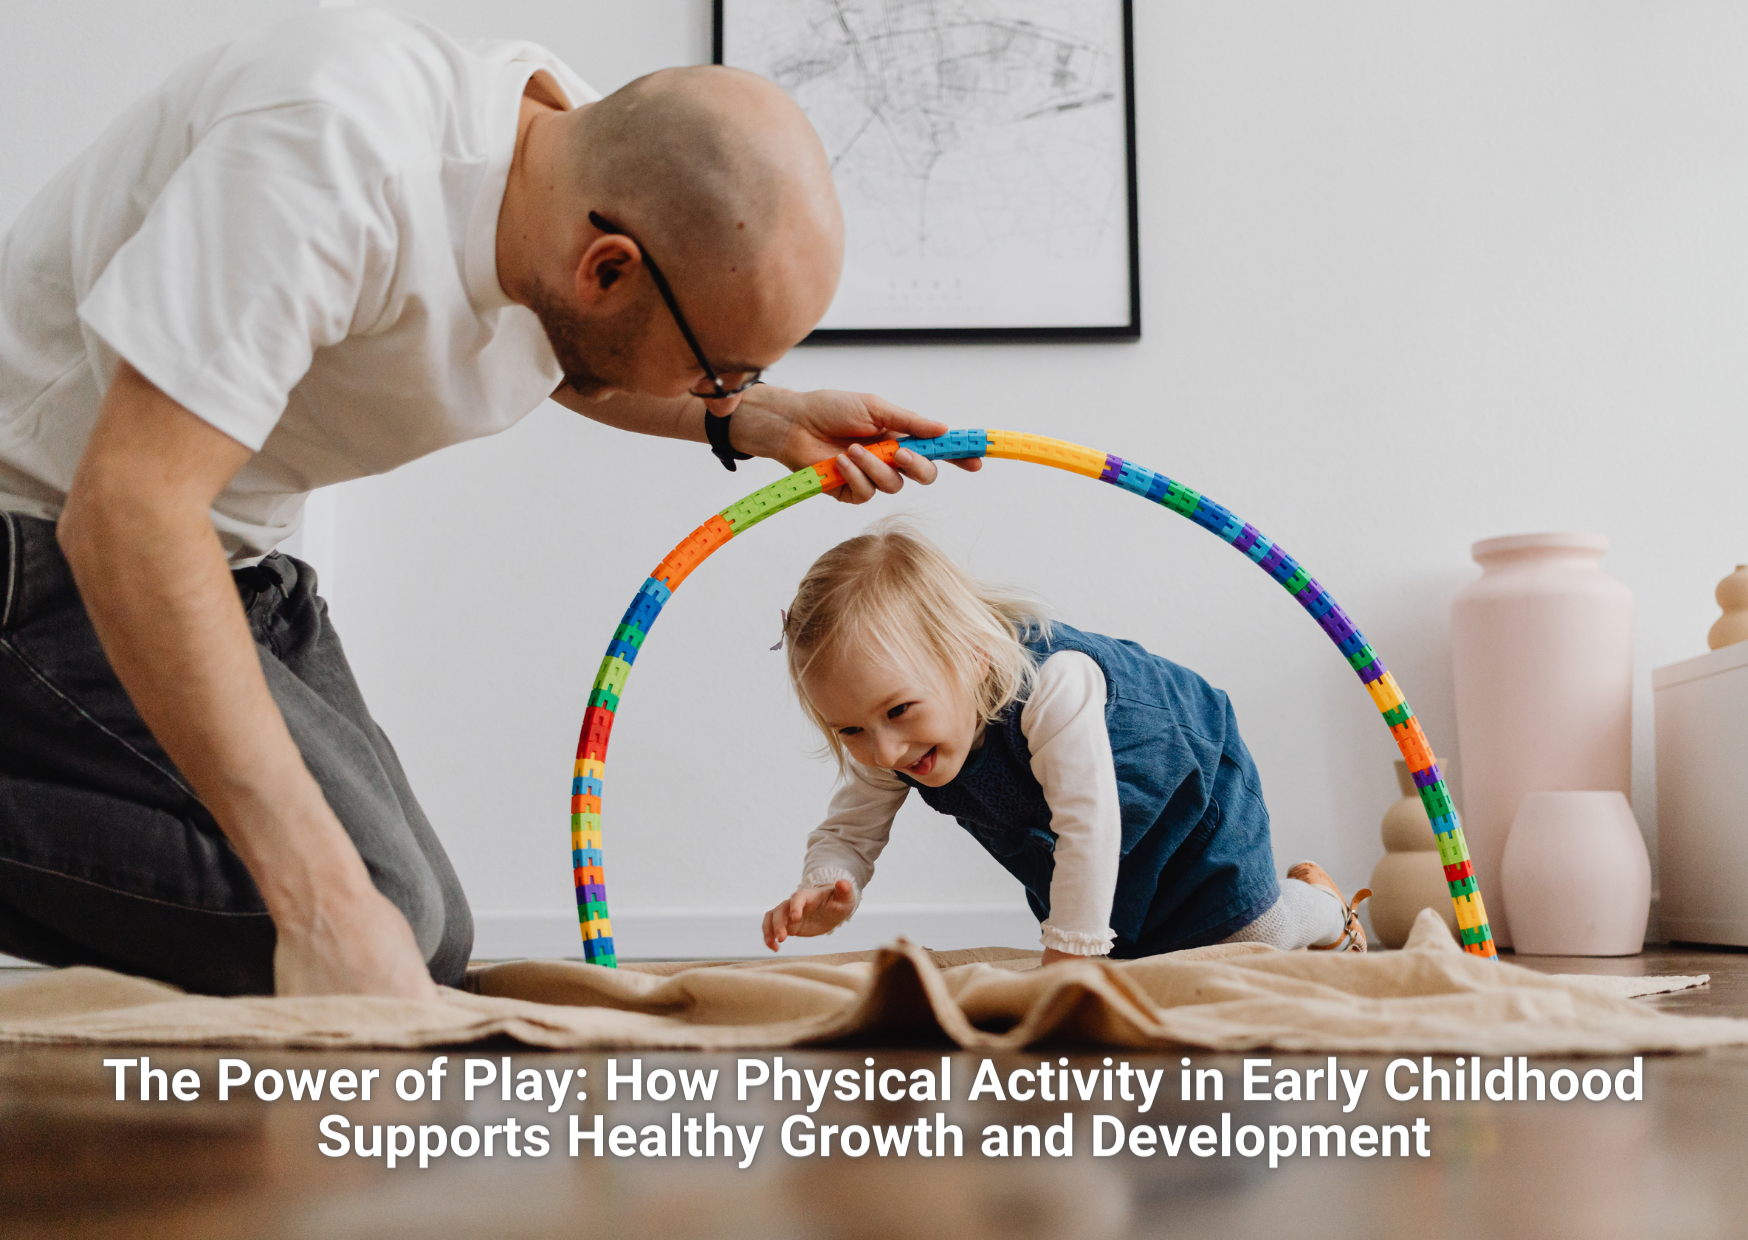 The Power of Play: How Physical Activity in Early Childhood Supports Healthy Growth and Development